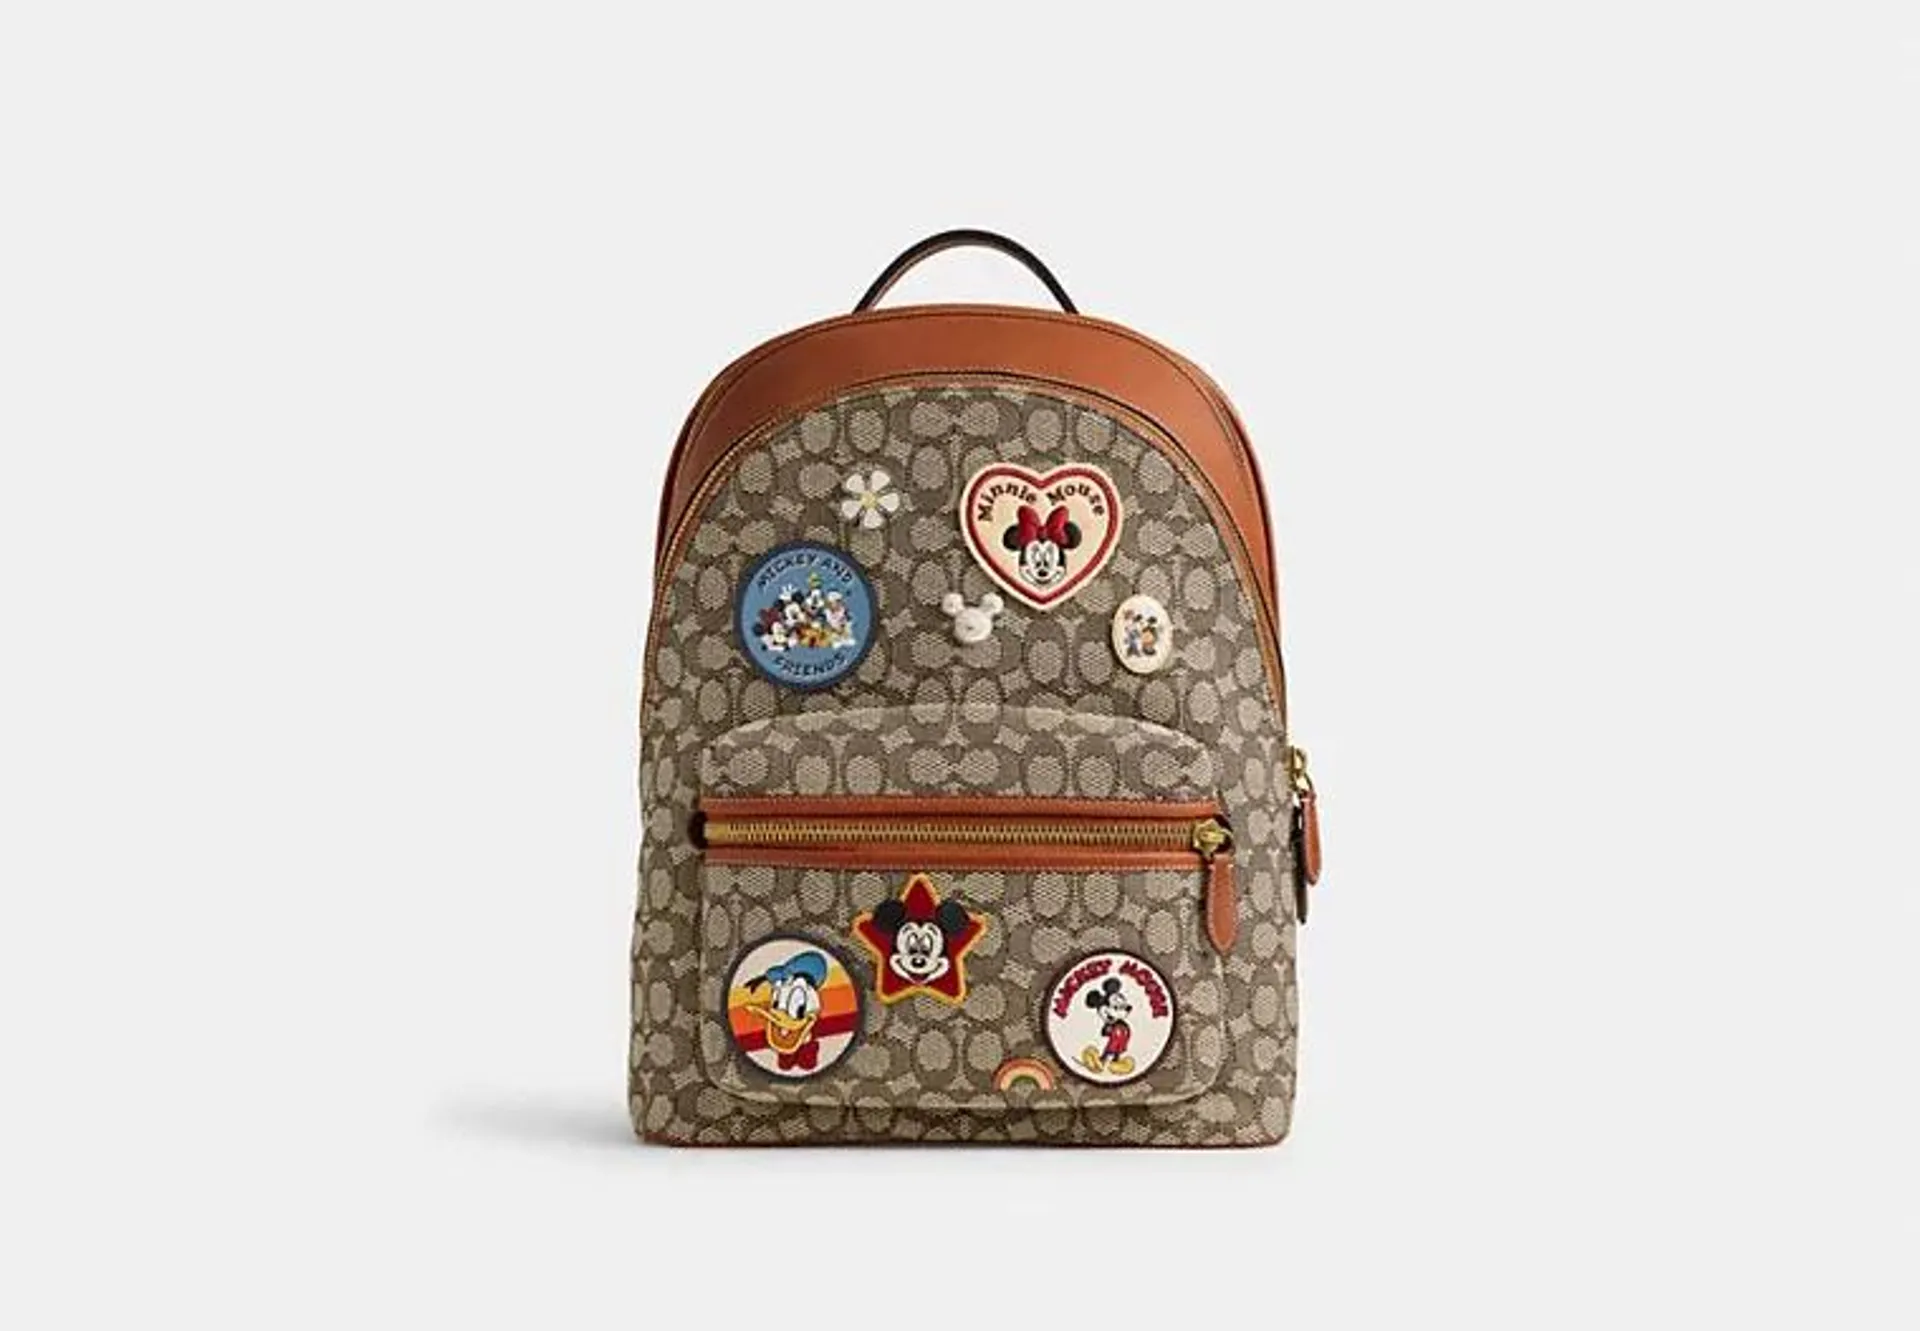 Disney X Coach Charter Backpack In Signature Textile Jacquard With Patches